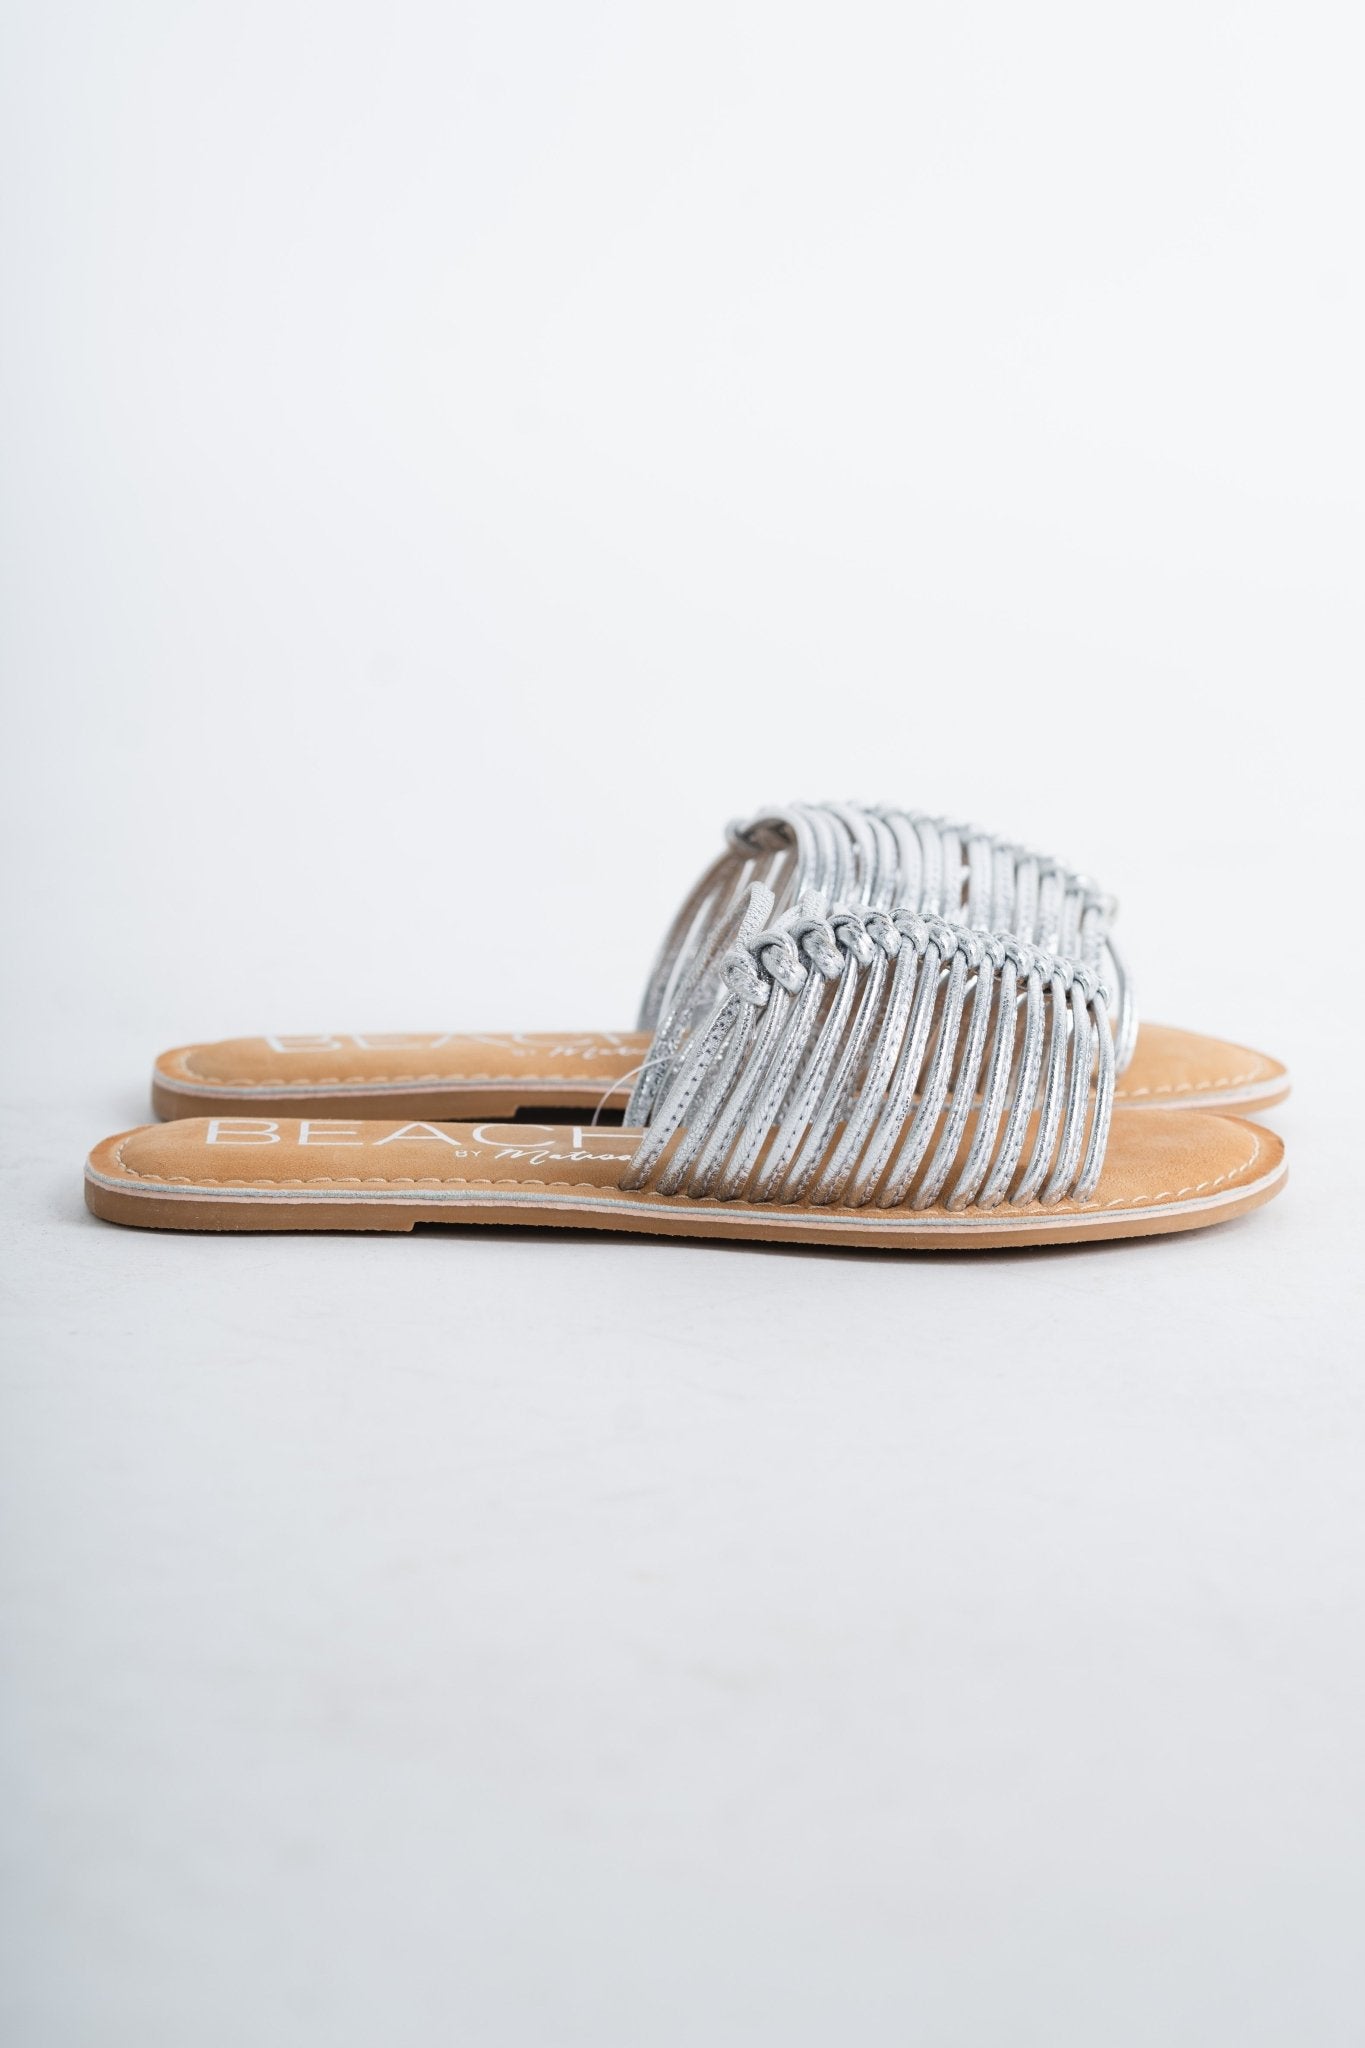 Baxter leather sandals silver - Affordable shoes - Boutique Shoes at Lush Fashion Lounge Boutique in Oklahoma City